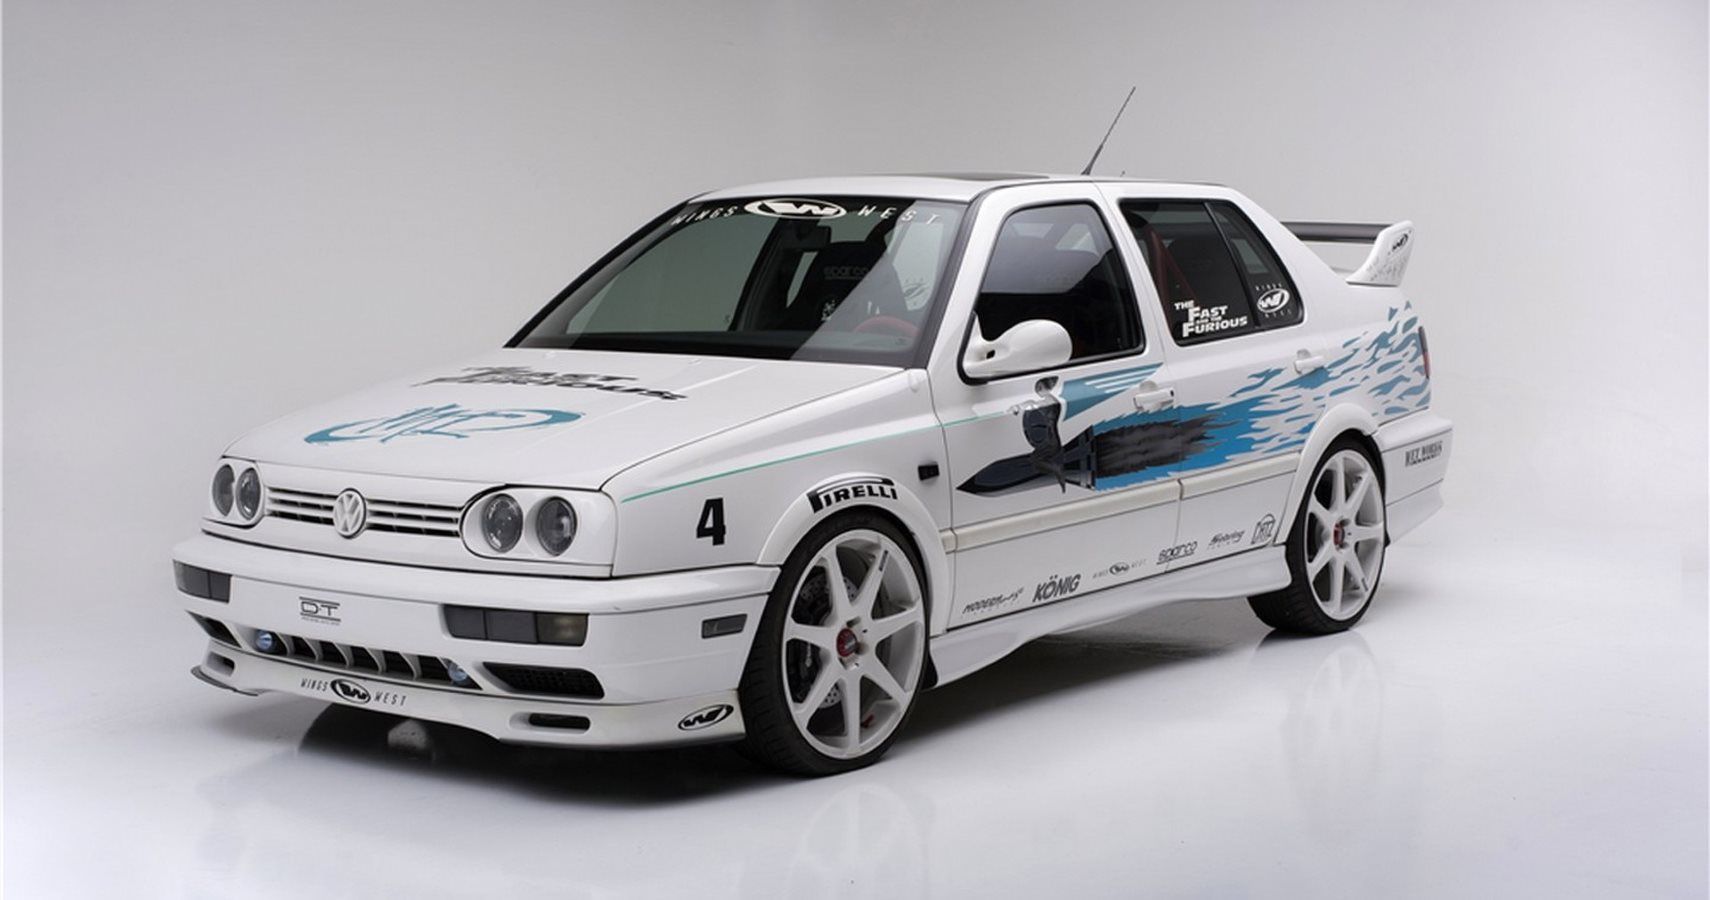 Fast & Furious ’95 Jetta Review: What $99,900 Can Buy You